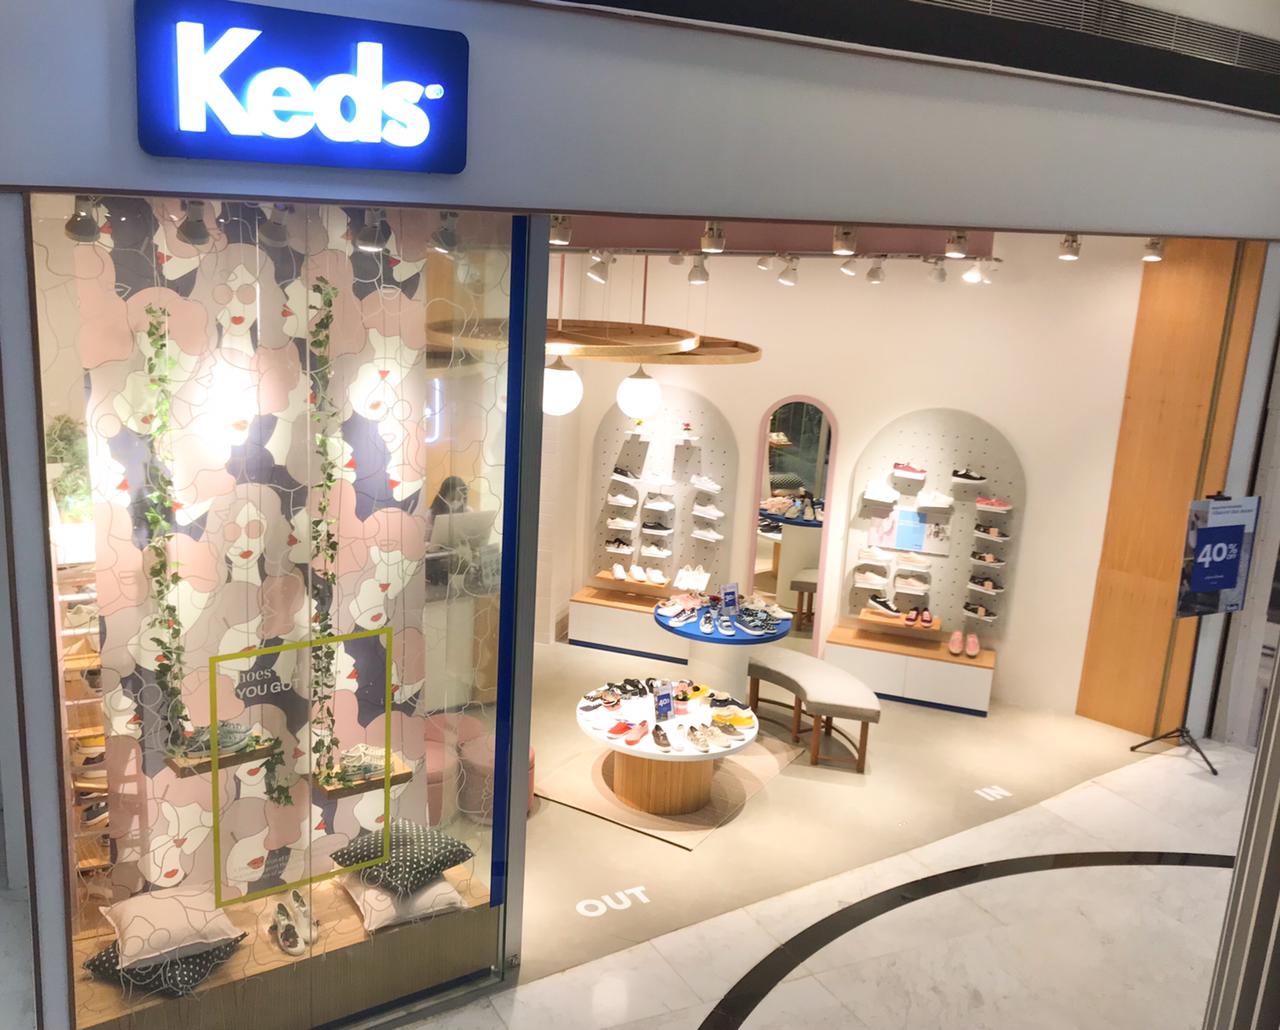 Keds shop front in lippo mall puri st. moritz